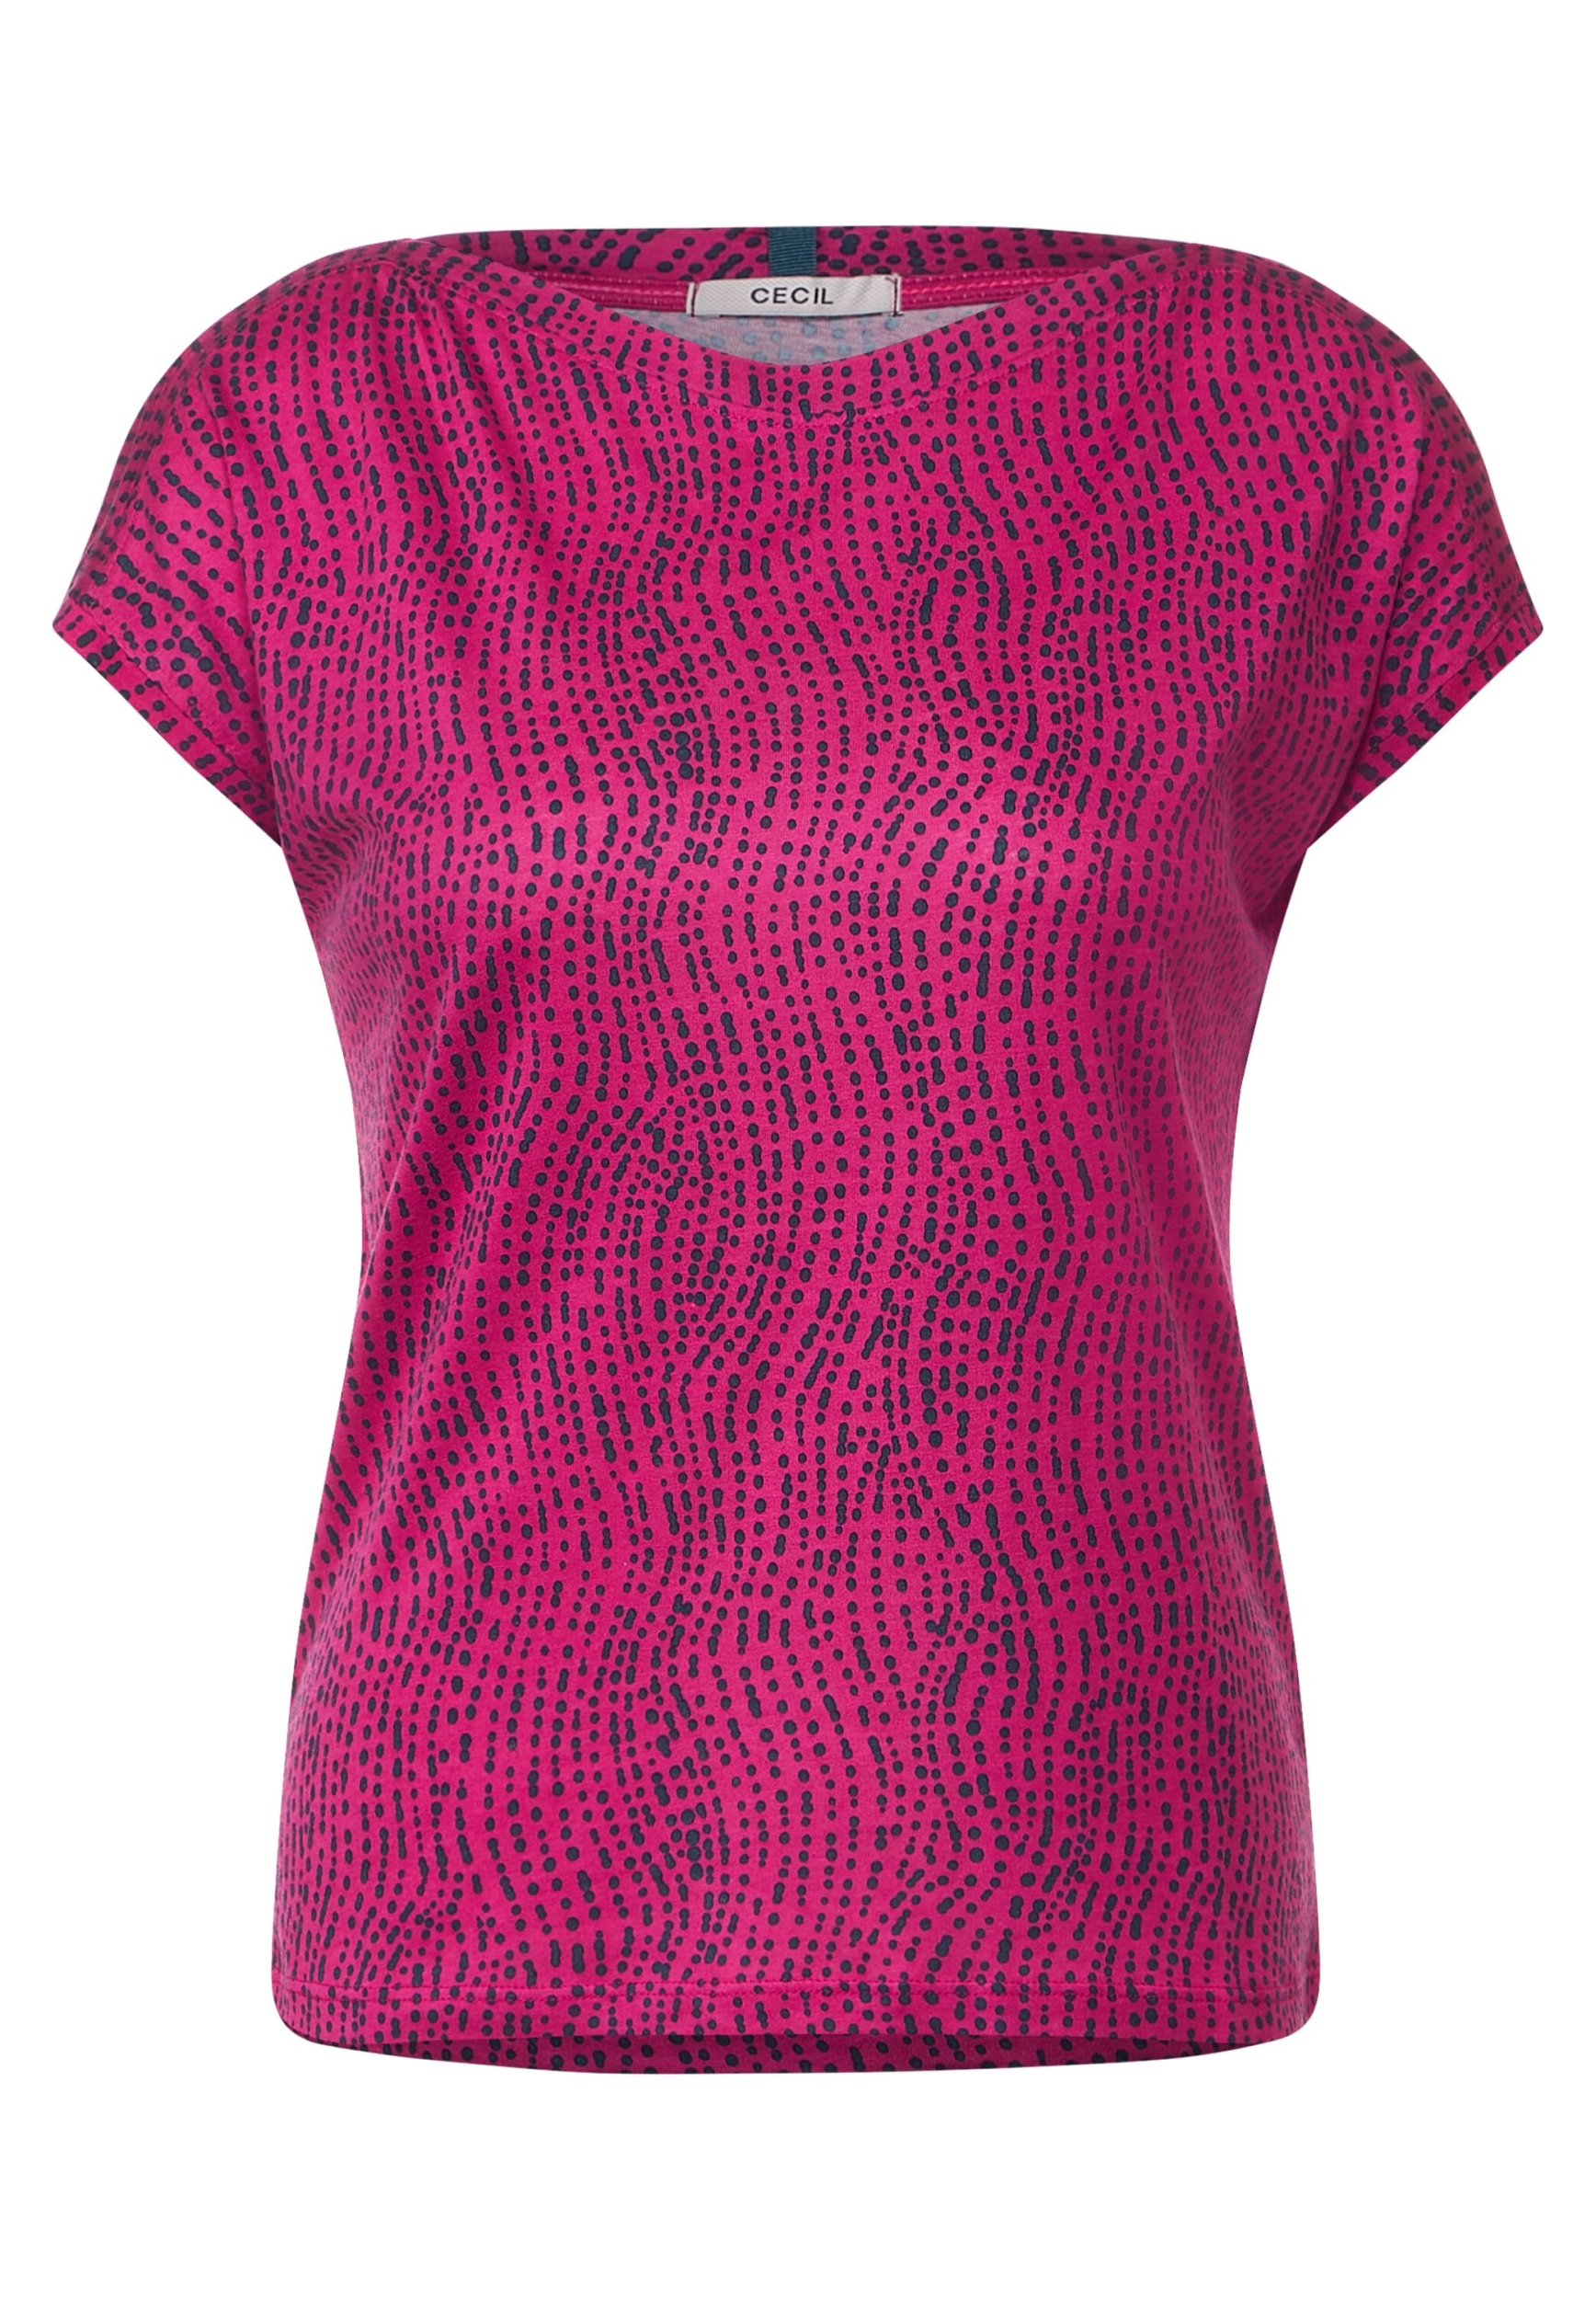 TOS AOP Dotted Weave cool | | | T-Shirt S pink B320331-25095-S